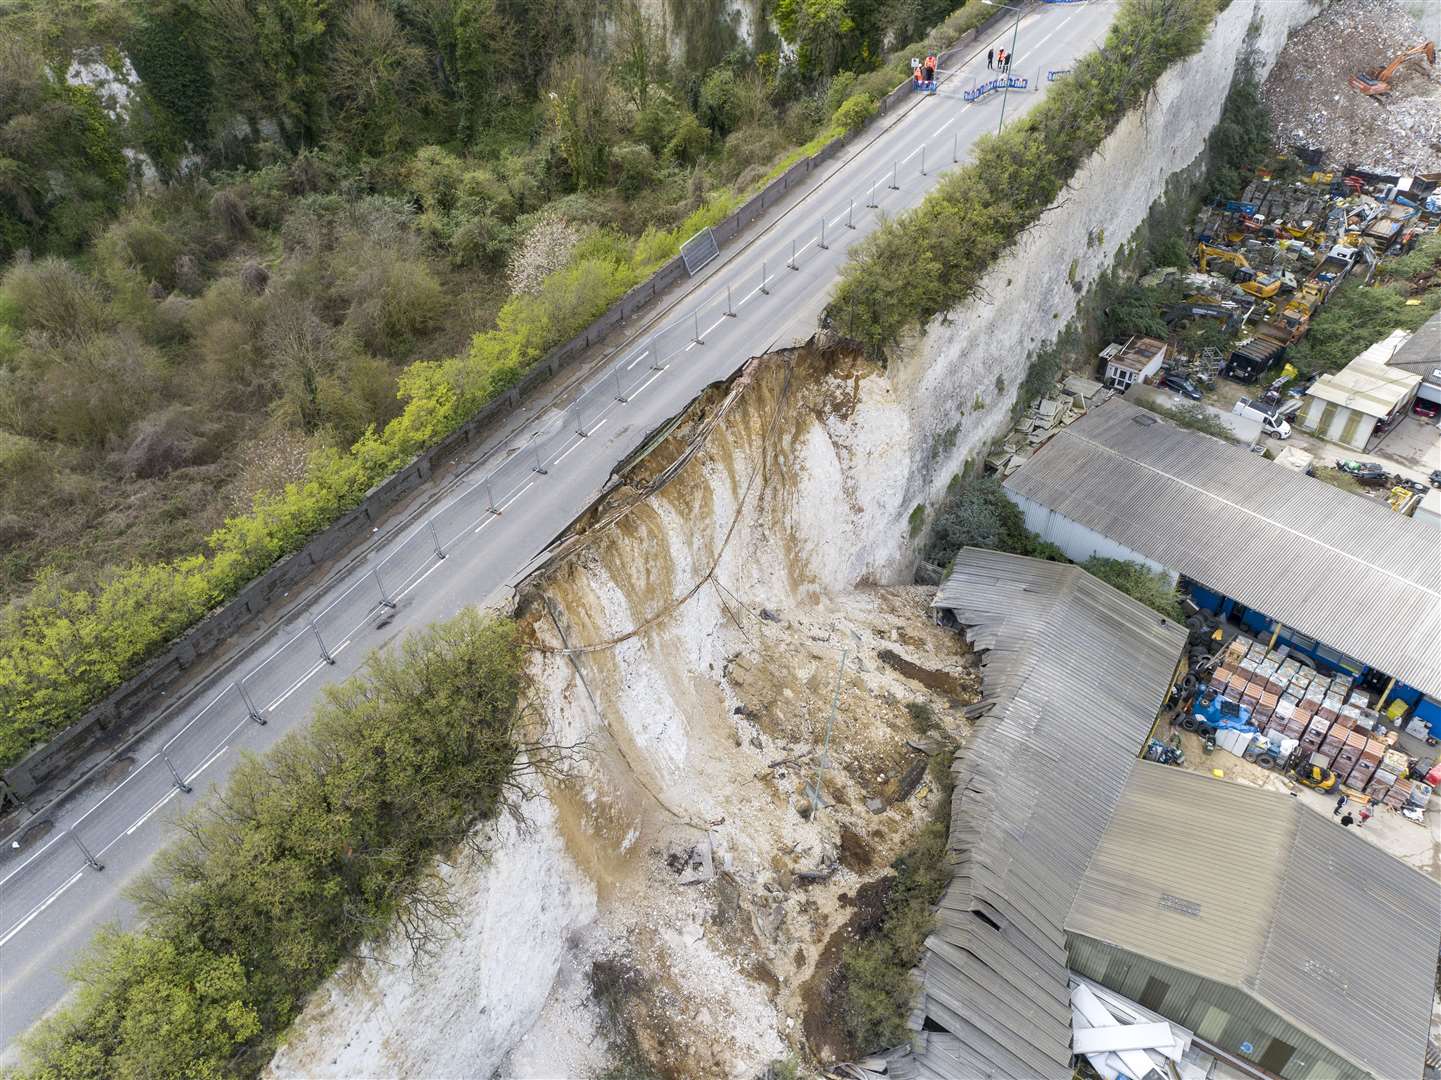 Aerial images show the collapsed cliff in Swanscombe. Images: High Profile Aerial